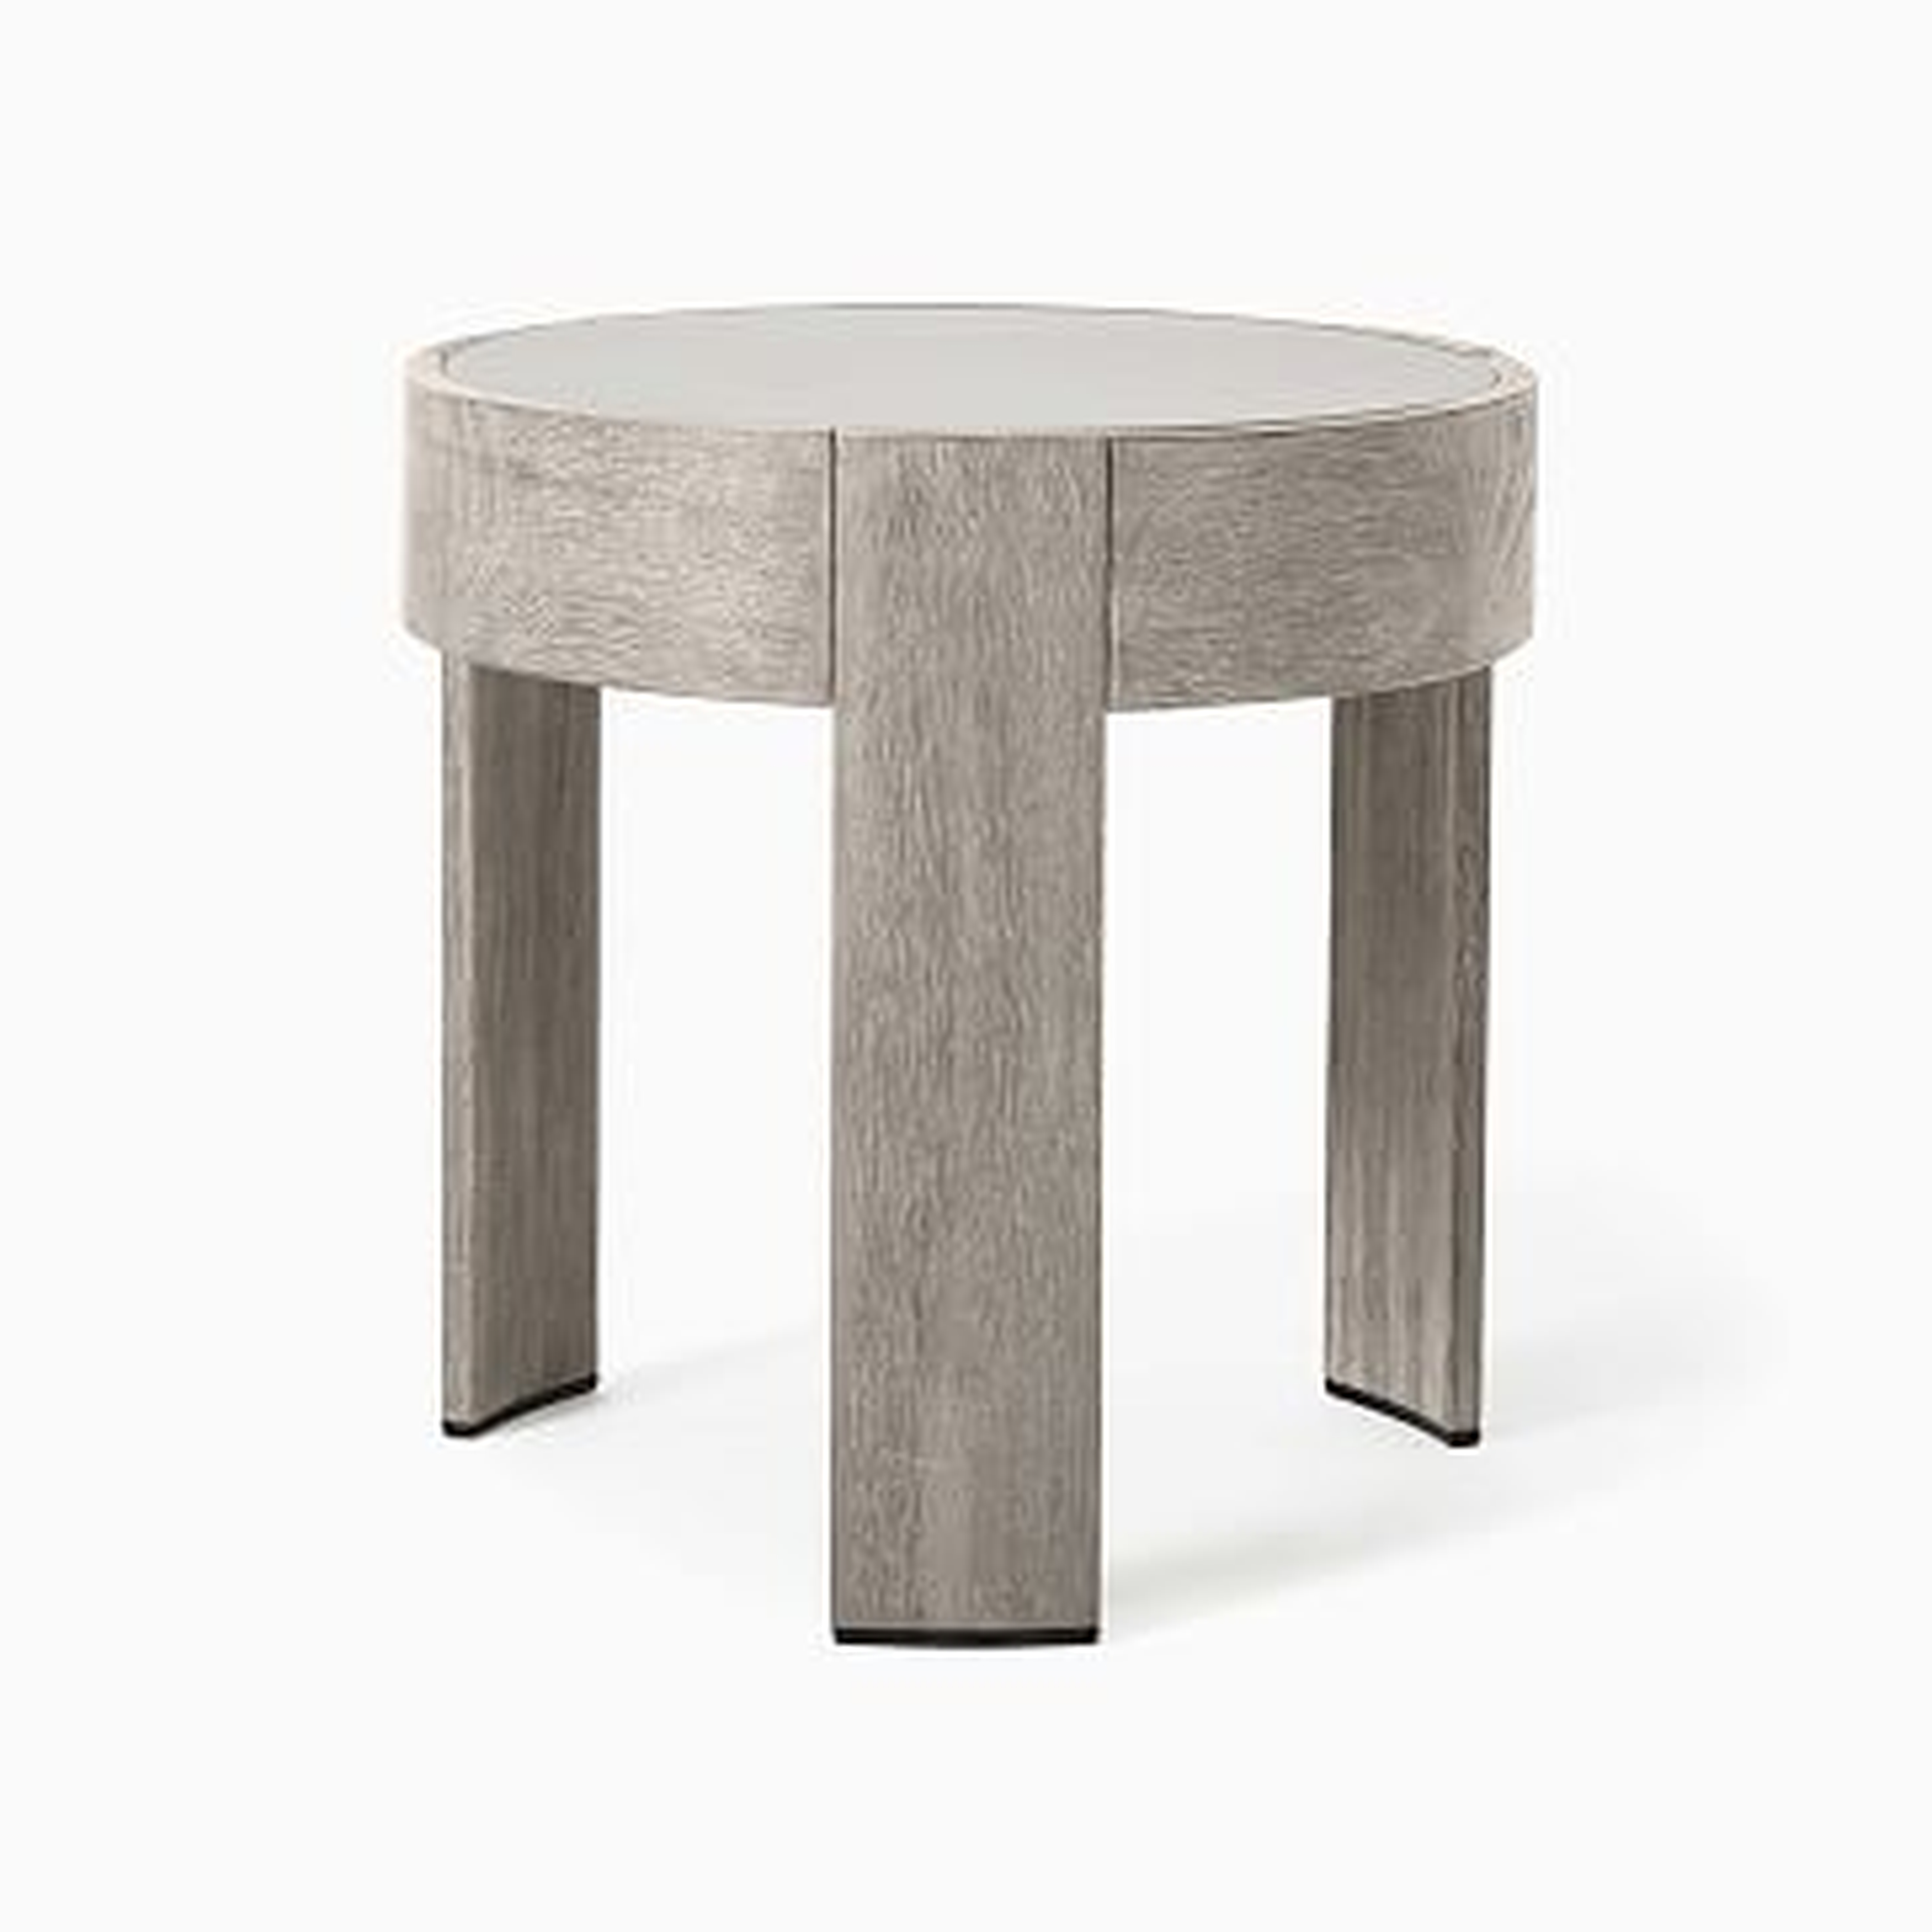 Portside Outdoor 20 in Round Side Table, Weathered Gray - West Elm